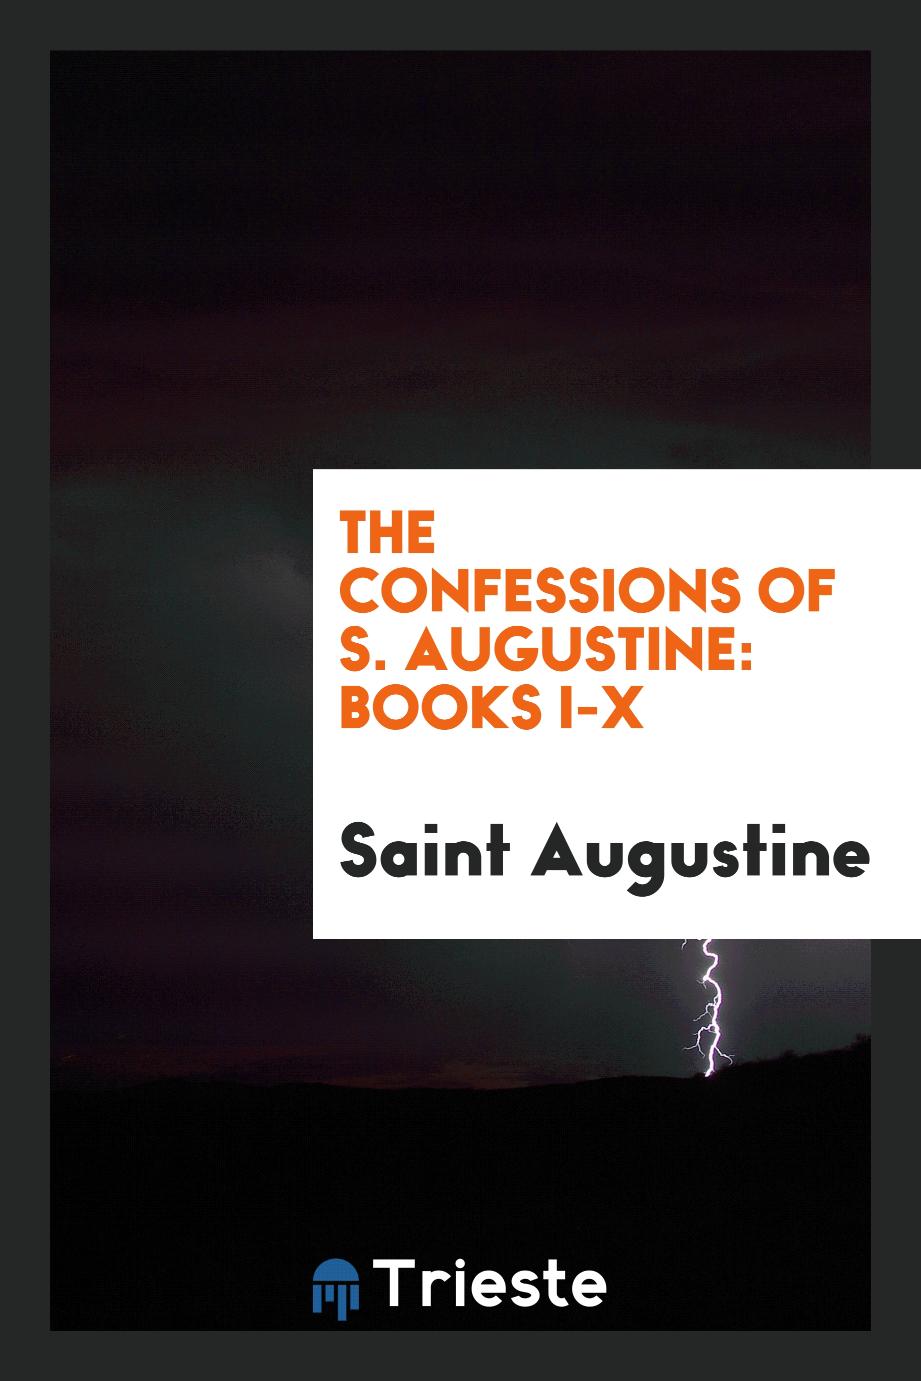 The confessions of S. Augustine: books I-X